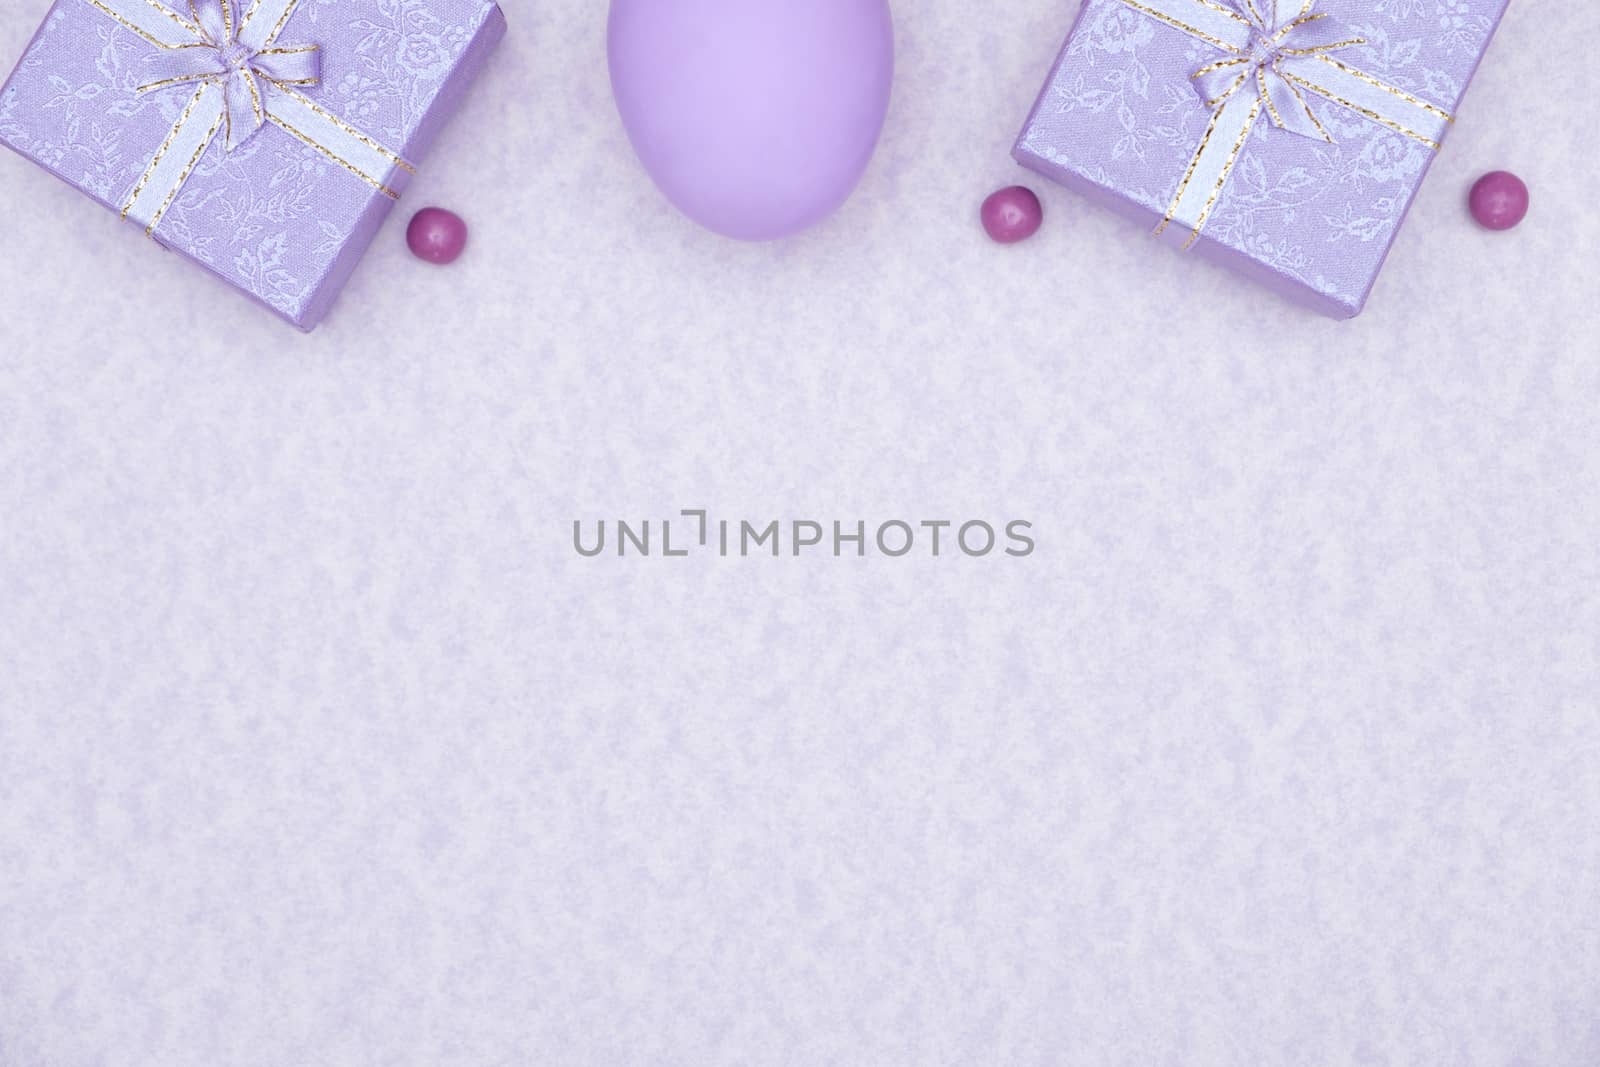 Egg shell on purple background. Minimal and easter concept, with copy space to write.